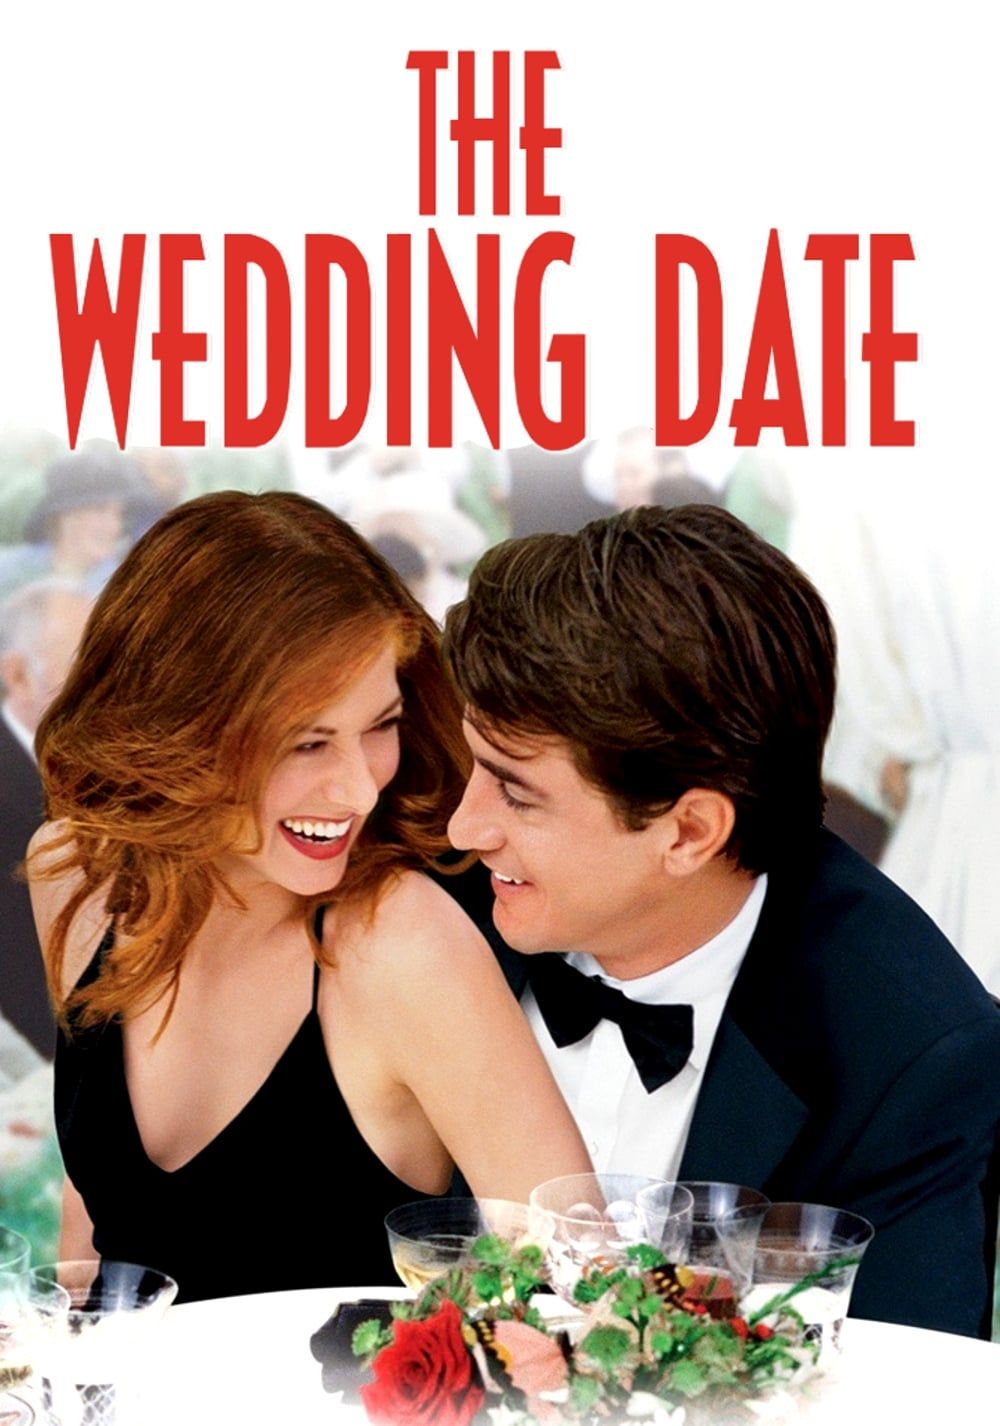 The Wedding Date 2005 [[⁺Full Movie⁺]] W a t c h Online  CLICK HERE TO  WATCH MOVIE ▻▻  ◅◅ Single-girl anxiety causes Kat  Ellis to hire a male escort to